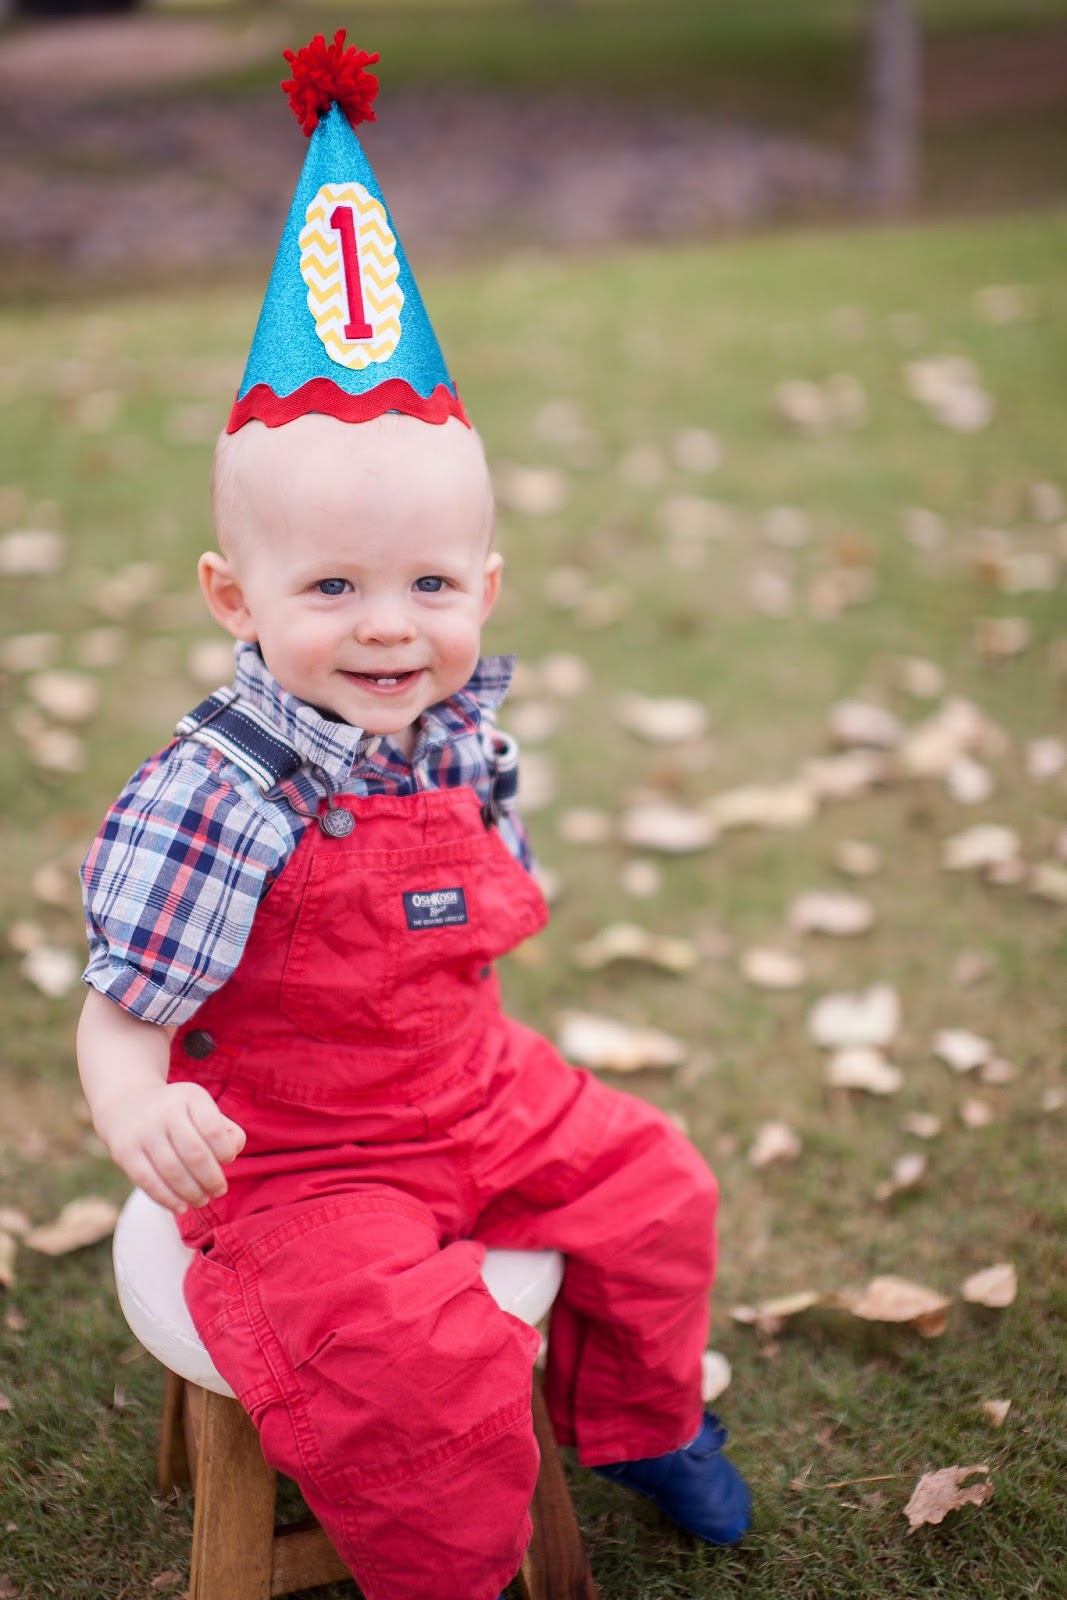 First birthday photo shoot: baby in red overalls wearing a birthday hat. 